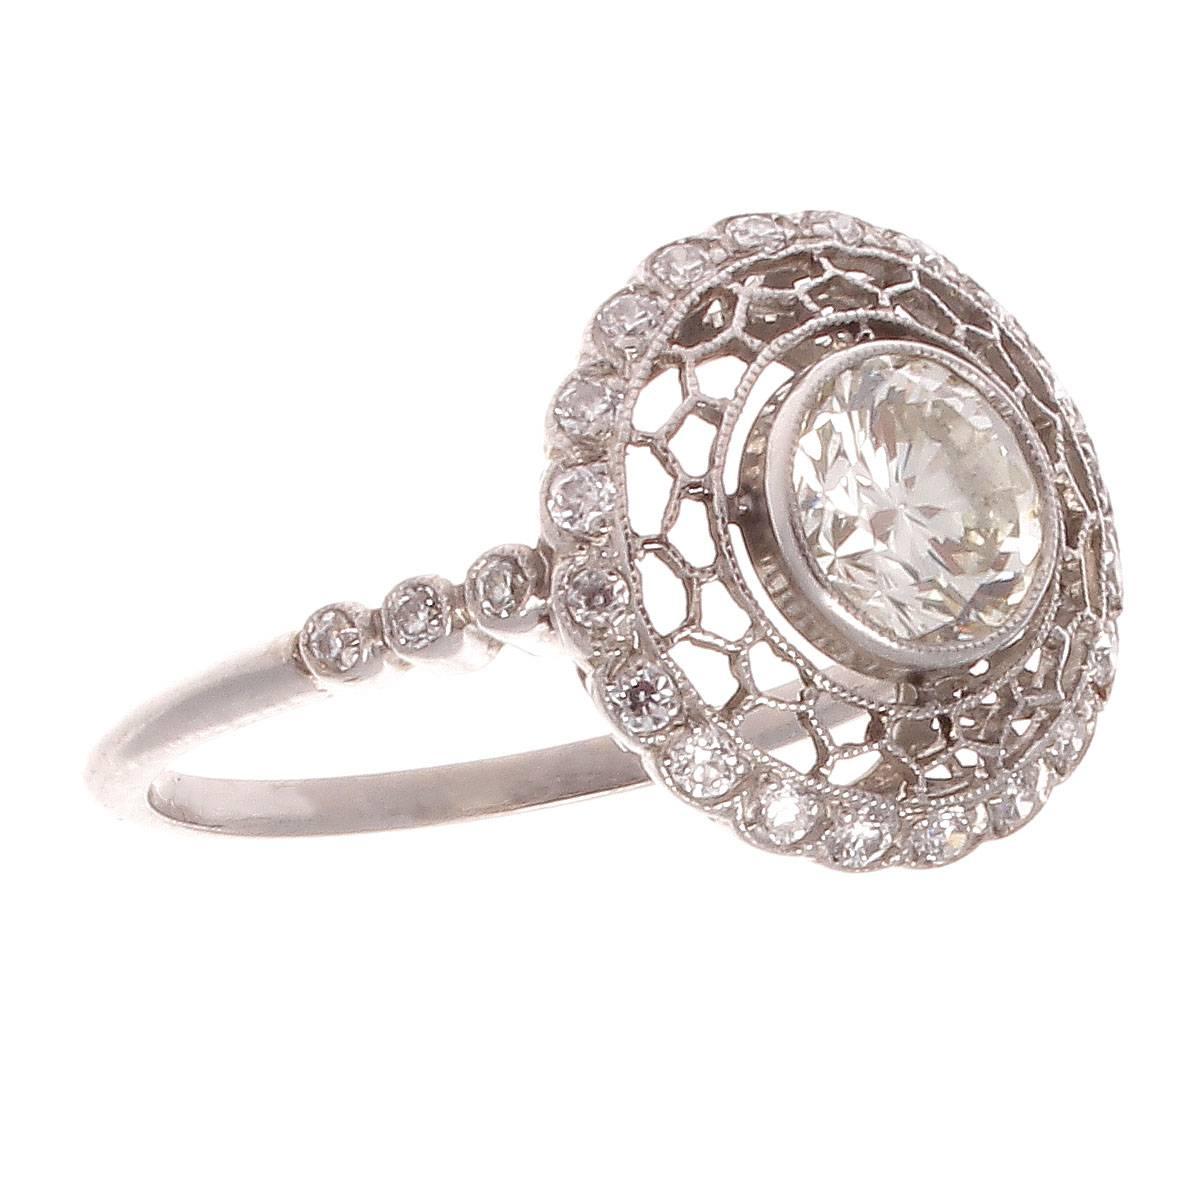 The allure of the Art Deco time period has inspired the creation of this eye catching ring full of intricate craftsmanship and superior design. Featuring a center diamond weighing 0.76 carats that is surrounded by a blooming flower of hand carved